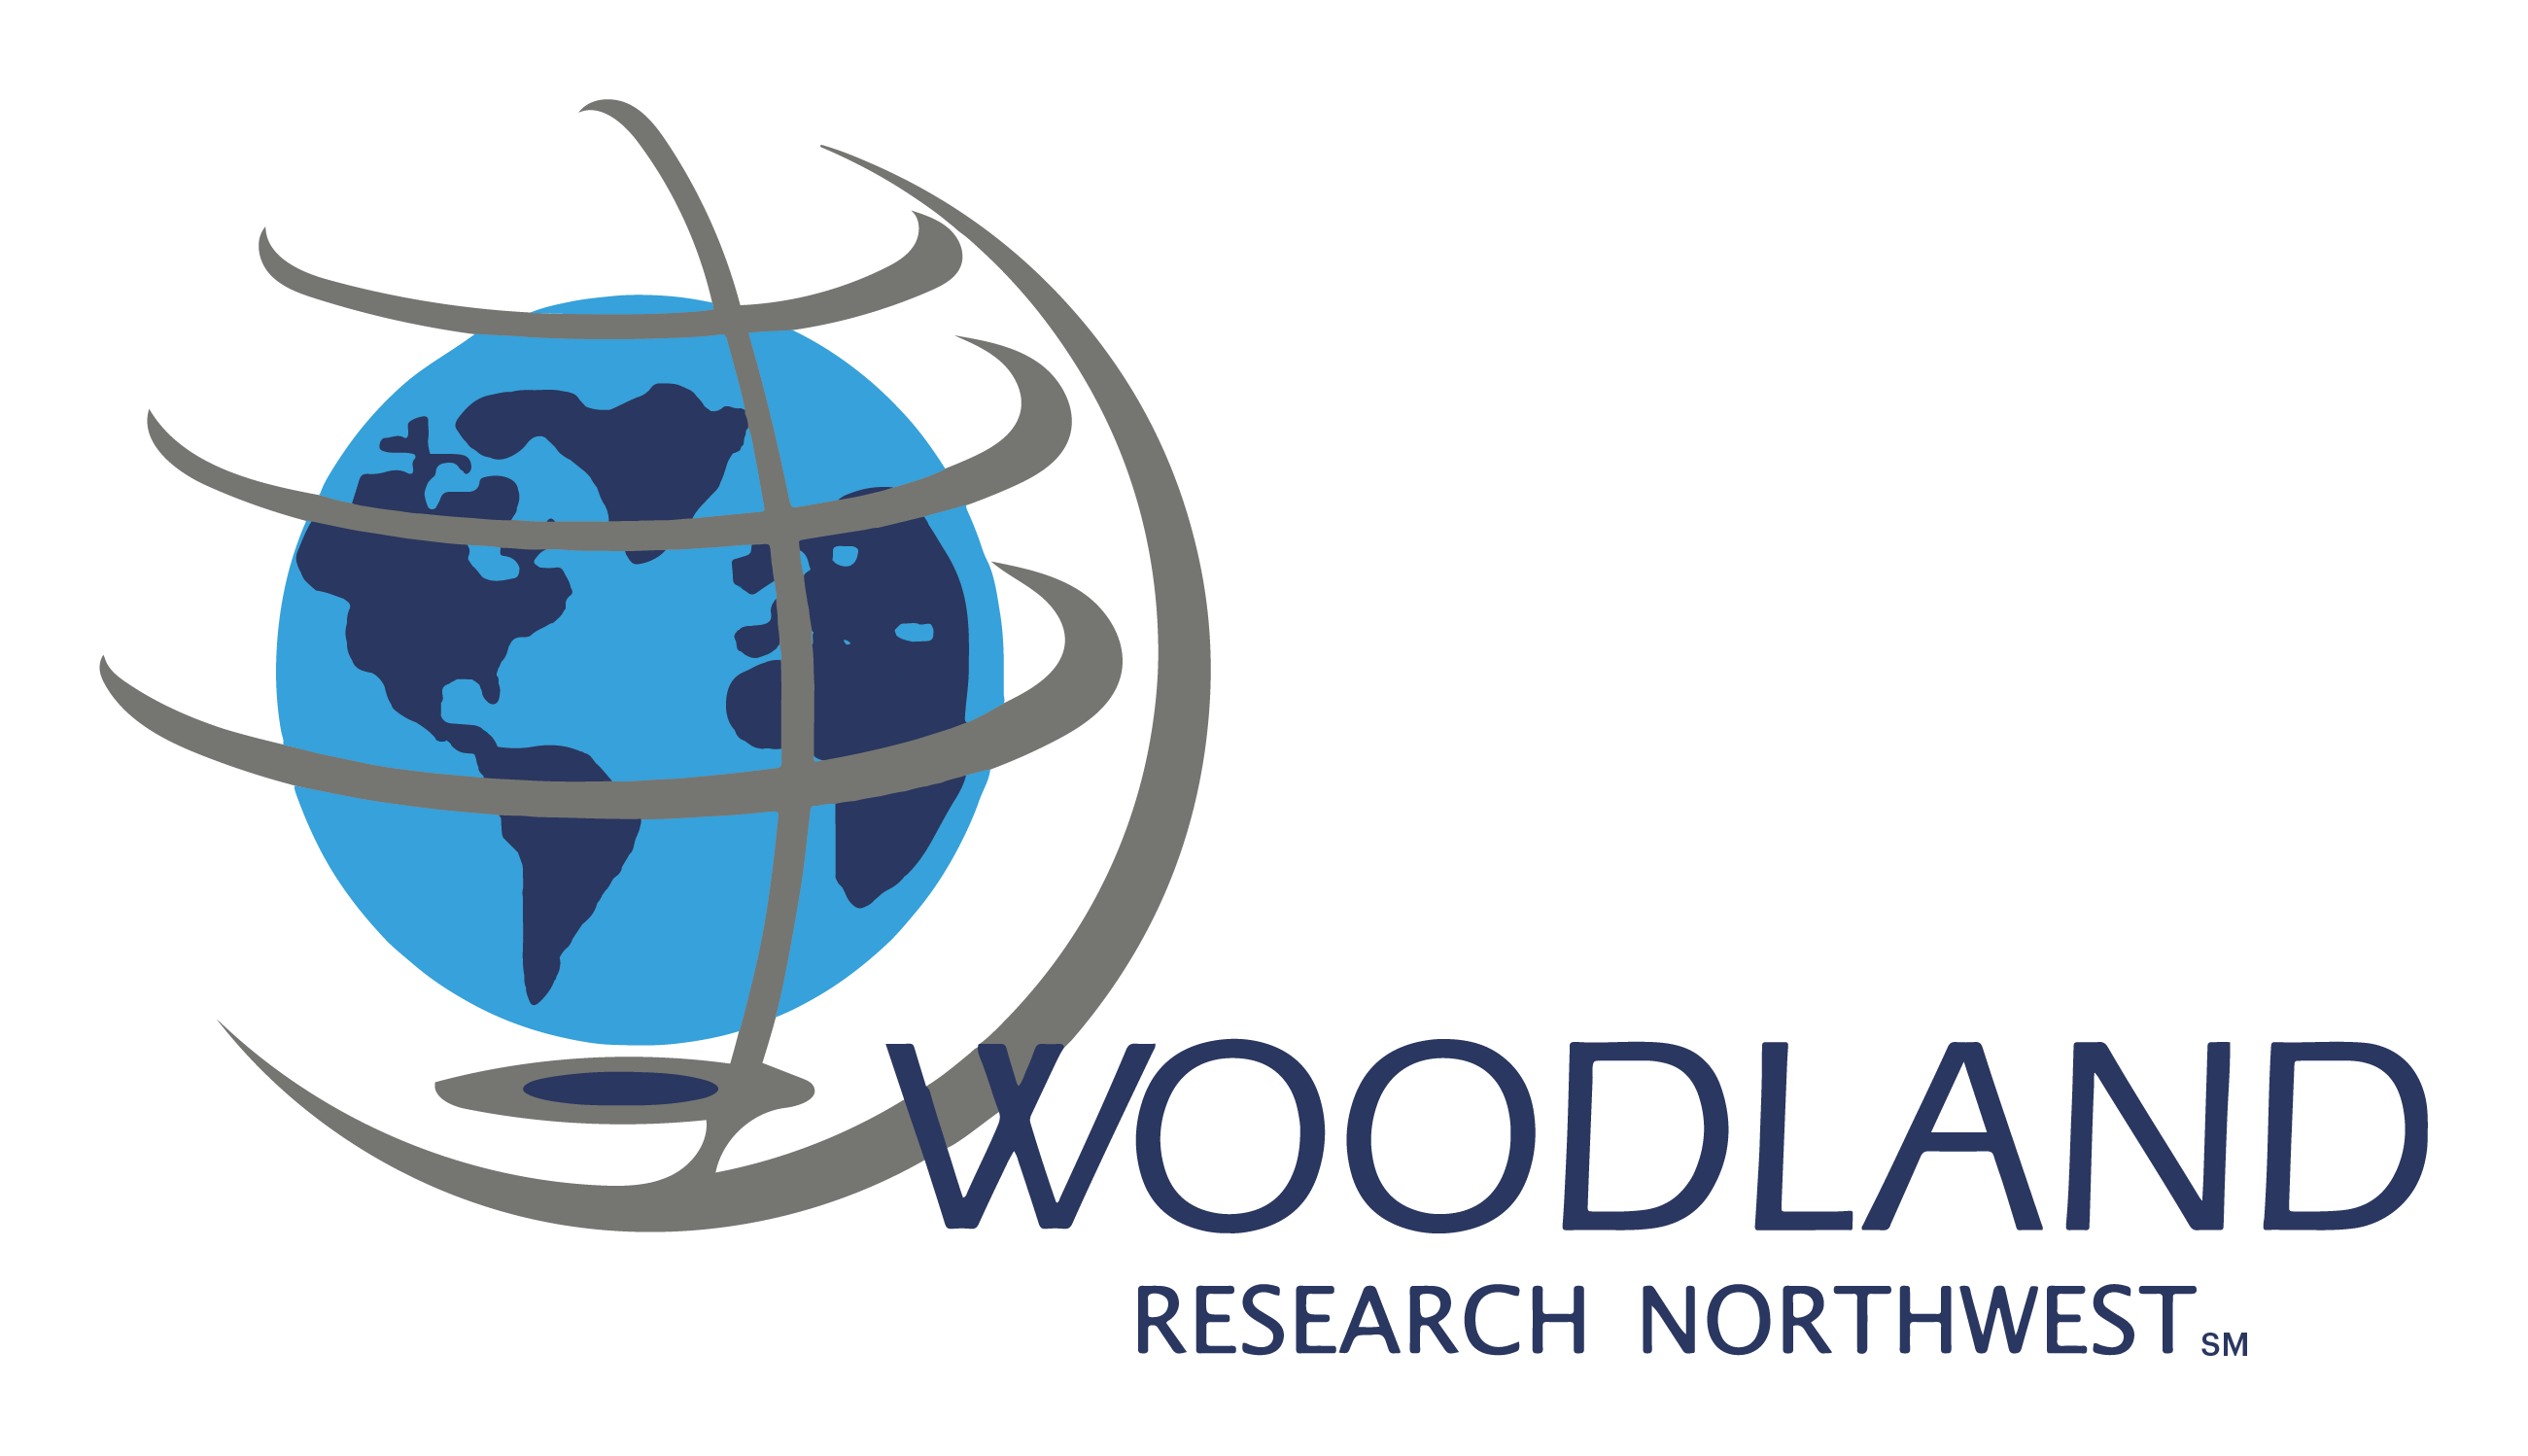 3. Woodland Research Noroeste (Platino)